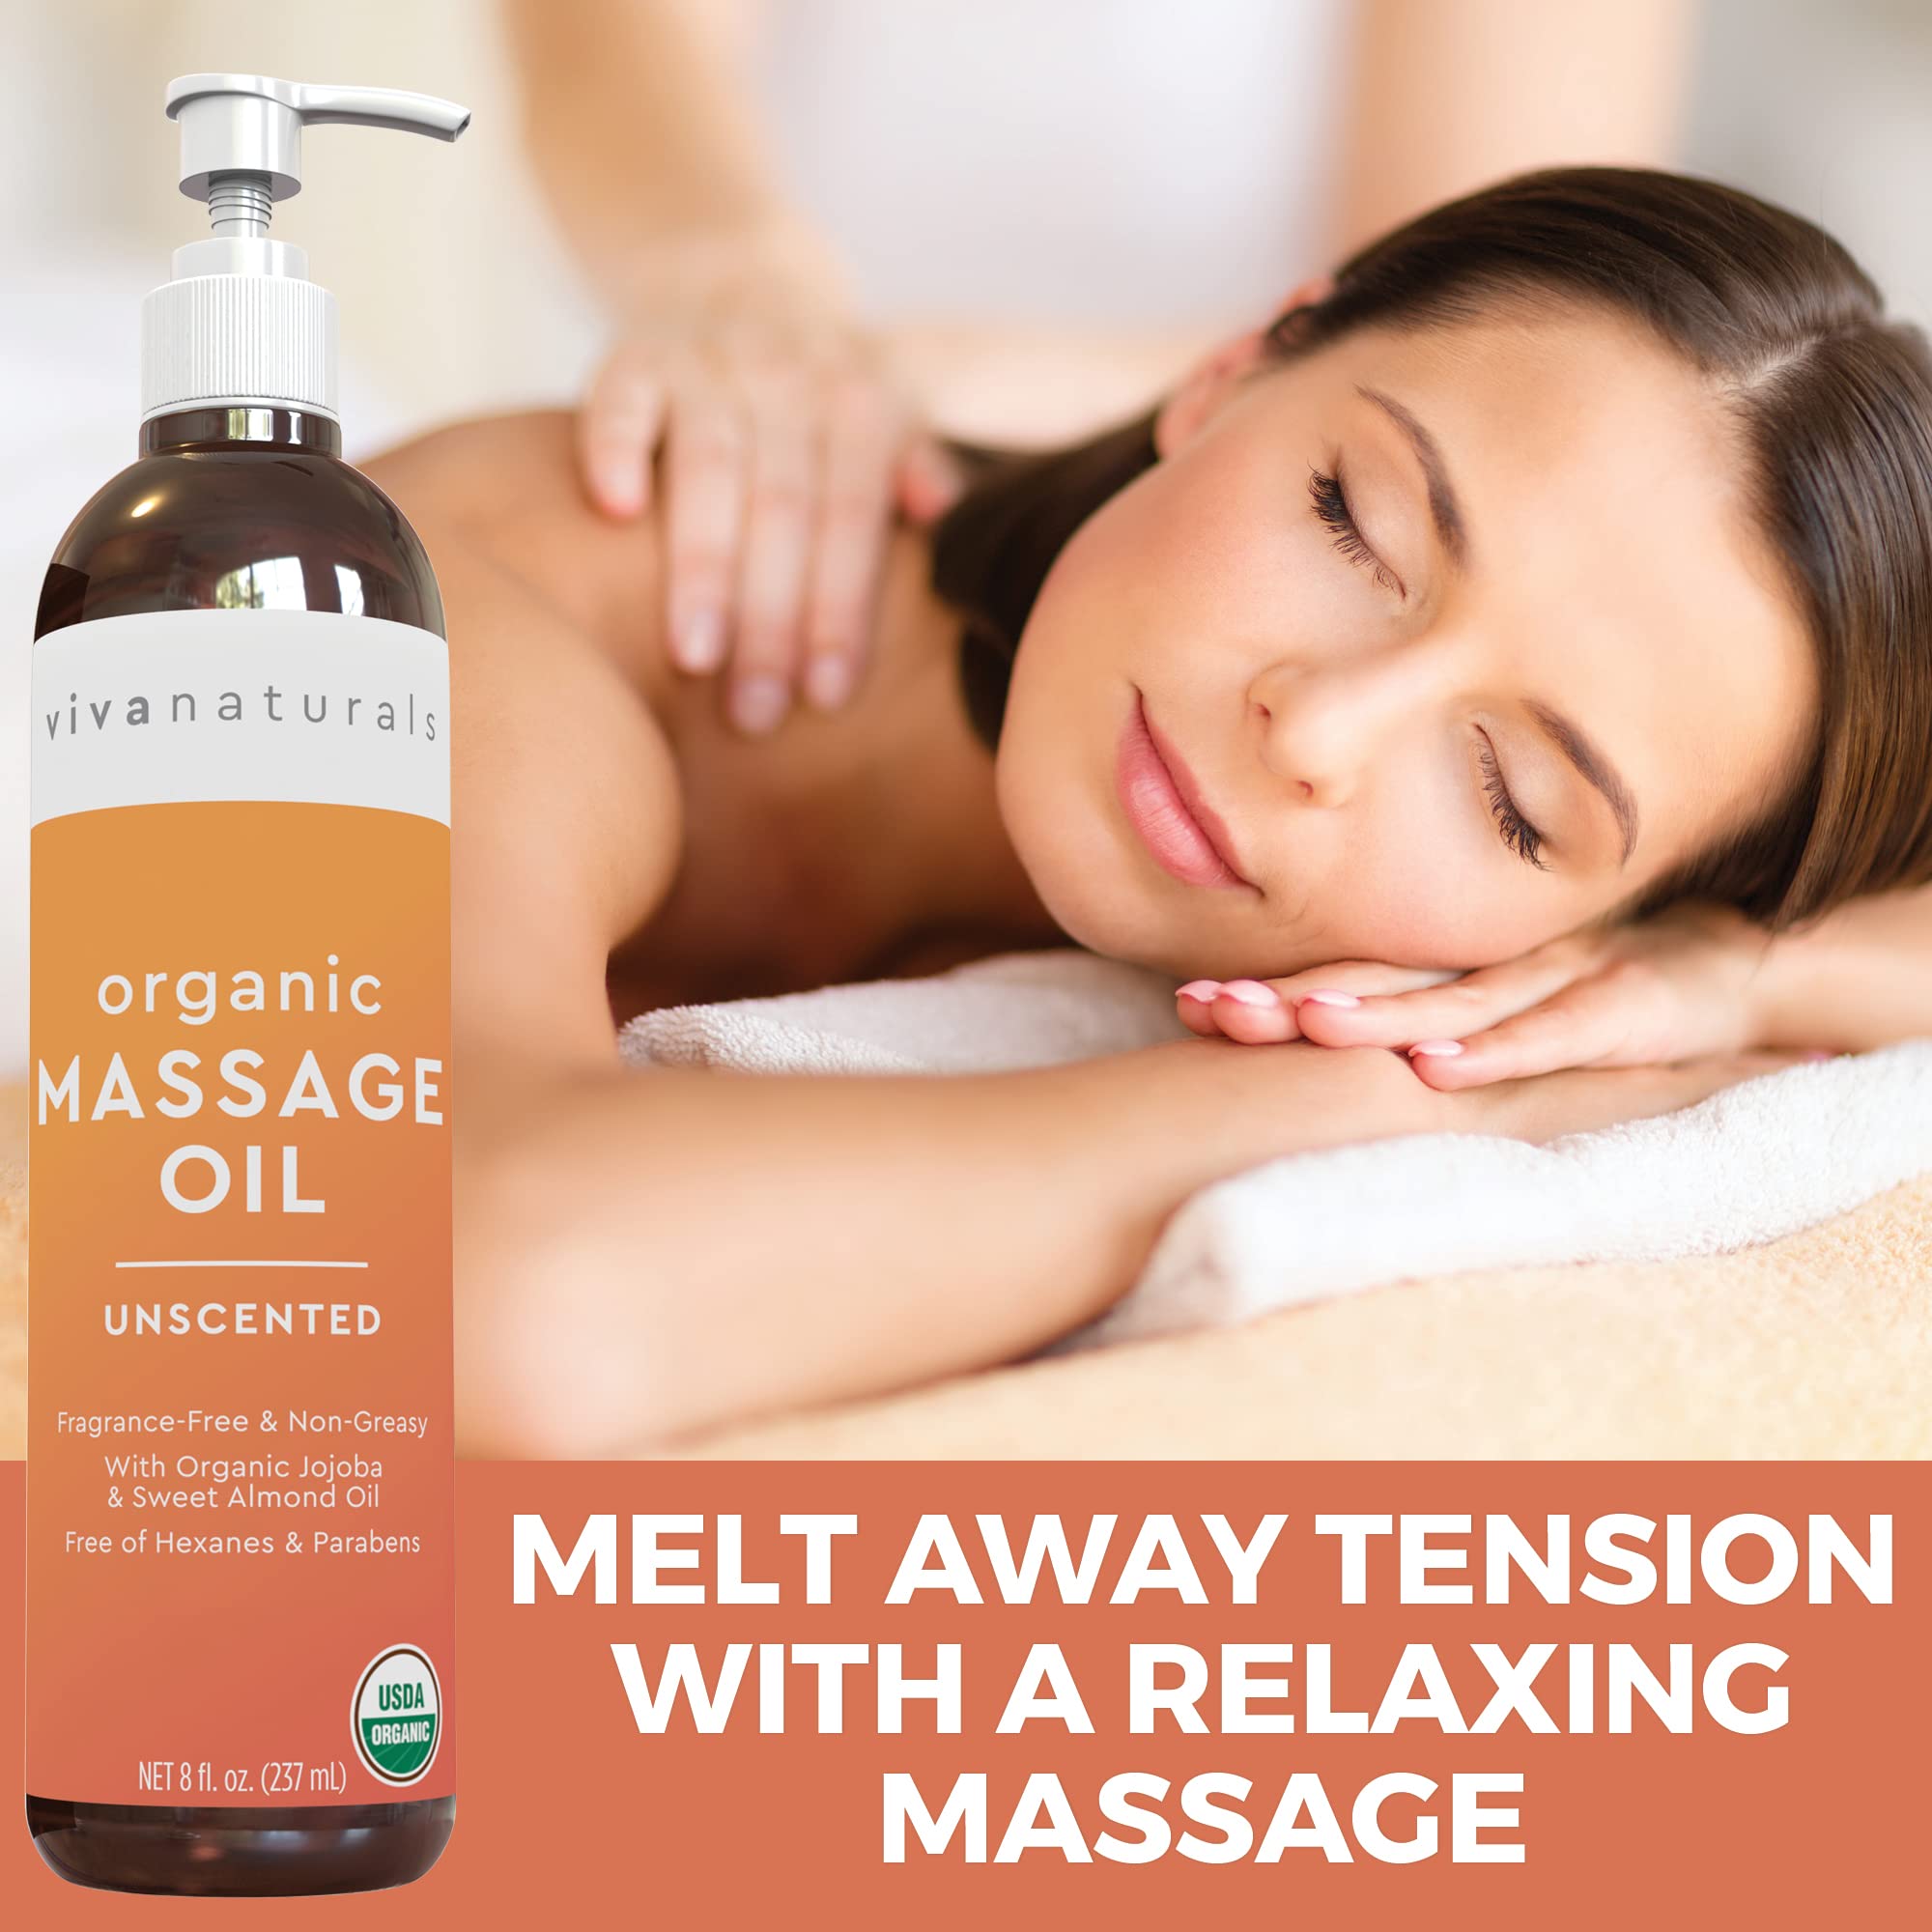 Certified Organic Massage Oil - Naturally Derived and Non-Greasy Unscented Massage Oil, Perfect for Massaging Muscles and Relaxation, Moisturizing Body Oil, 8 fl. oz.